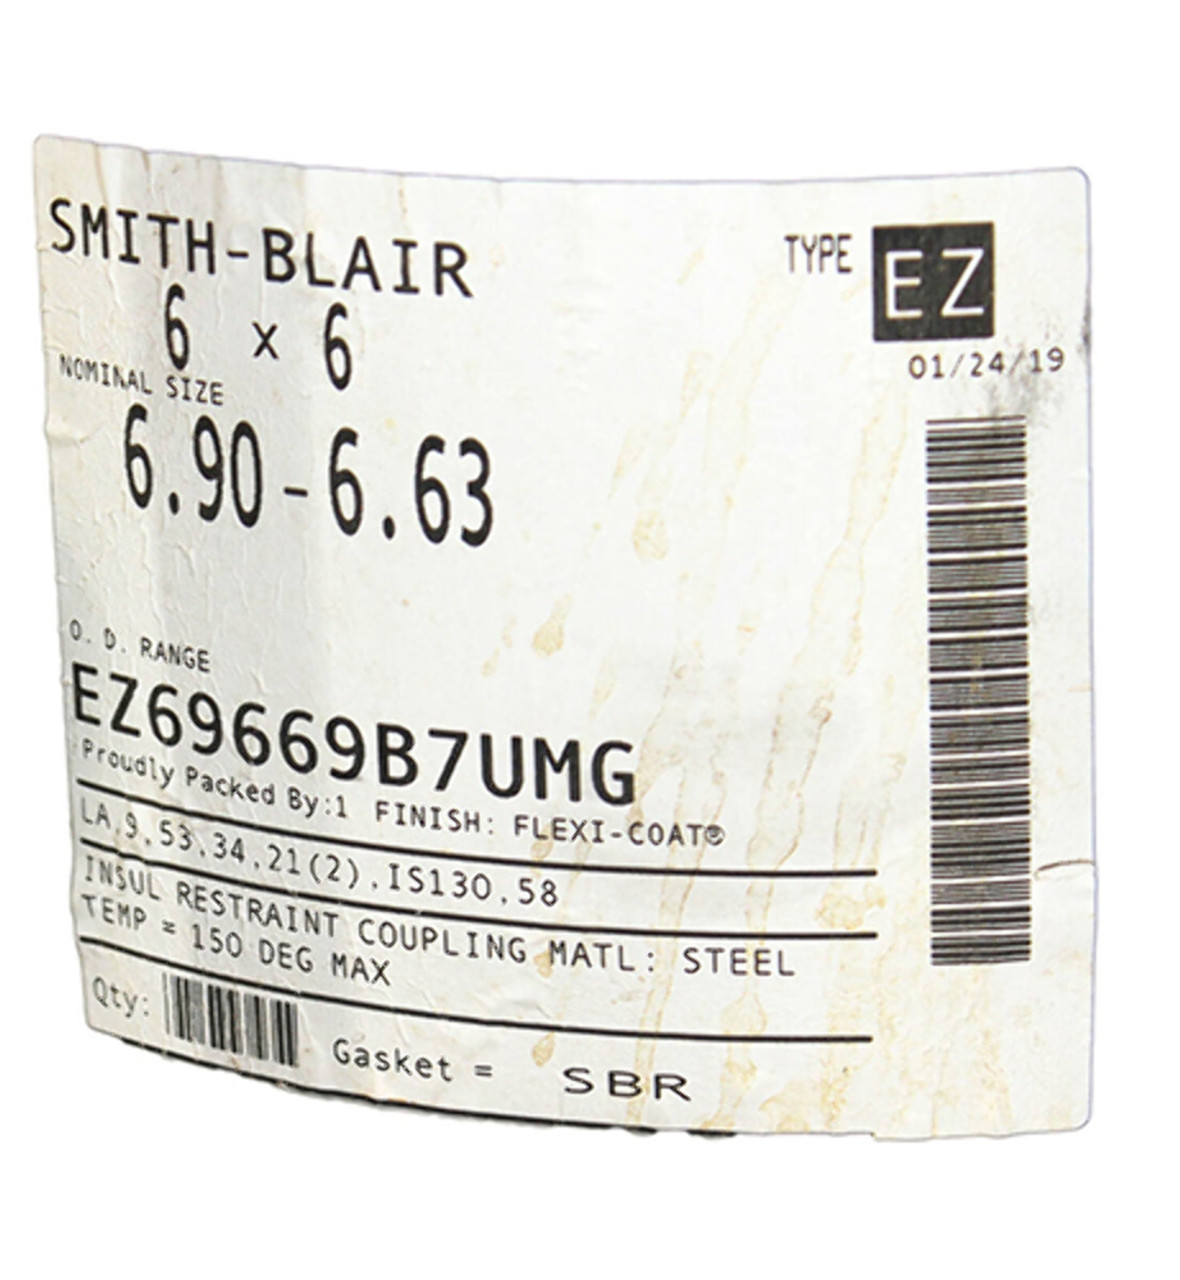 Smith-Blair EZ69669B7UMG 6X6 Insulated Restraint Coupling Nominal Size: 6-9/10 - 6-63/100